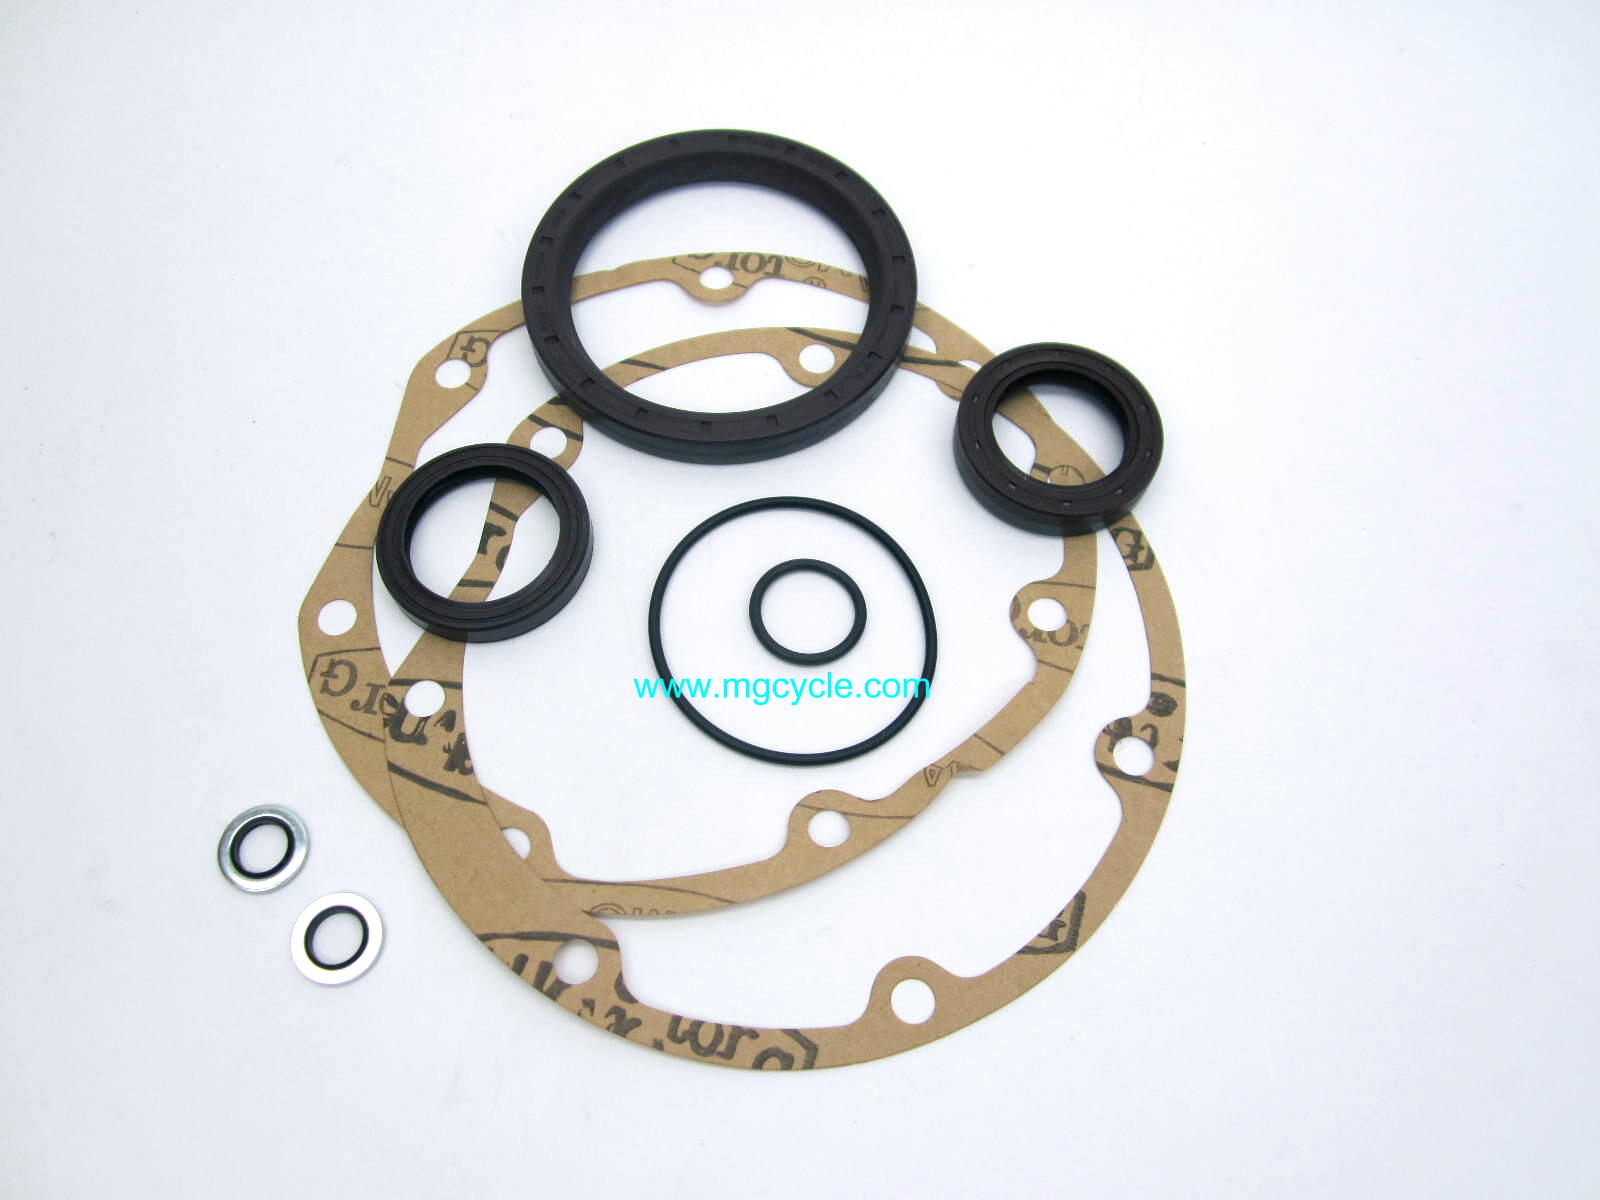 Final drive sealing kit for small twins V7 series 750cc